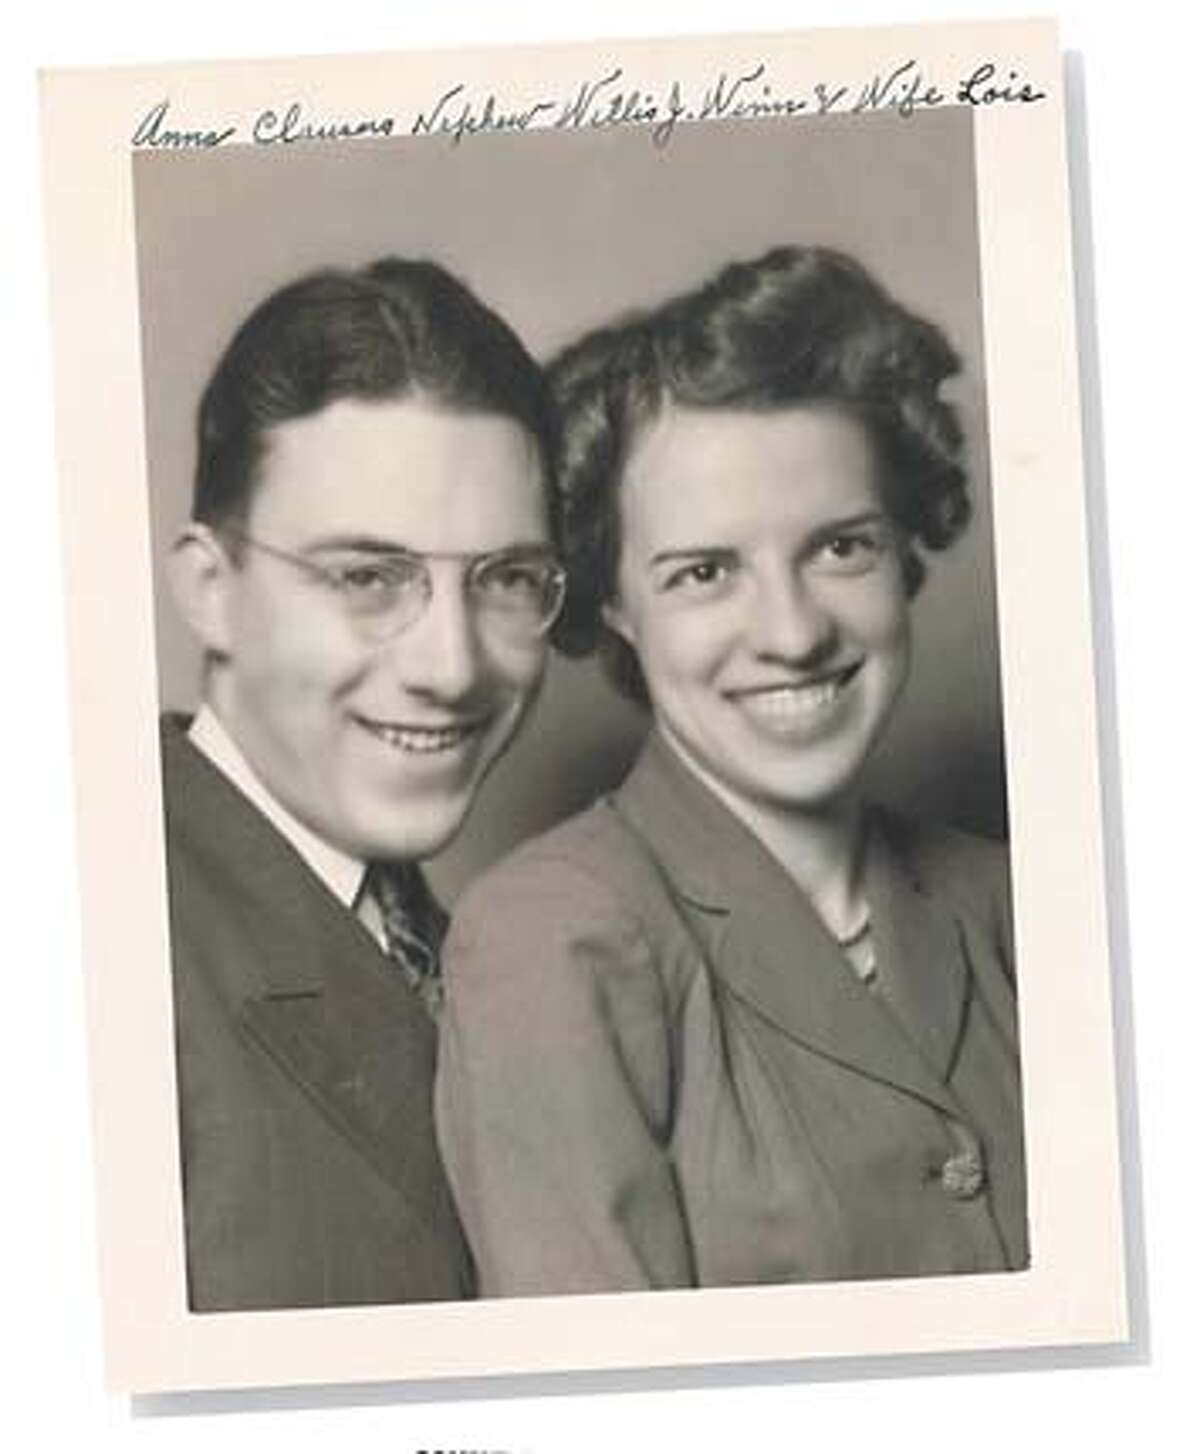 Willis and Lois Winn, the author's parents, as a young married couple, early in their career of collecting.